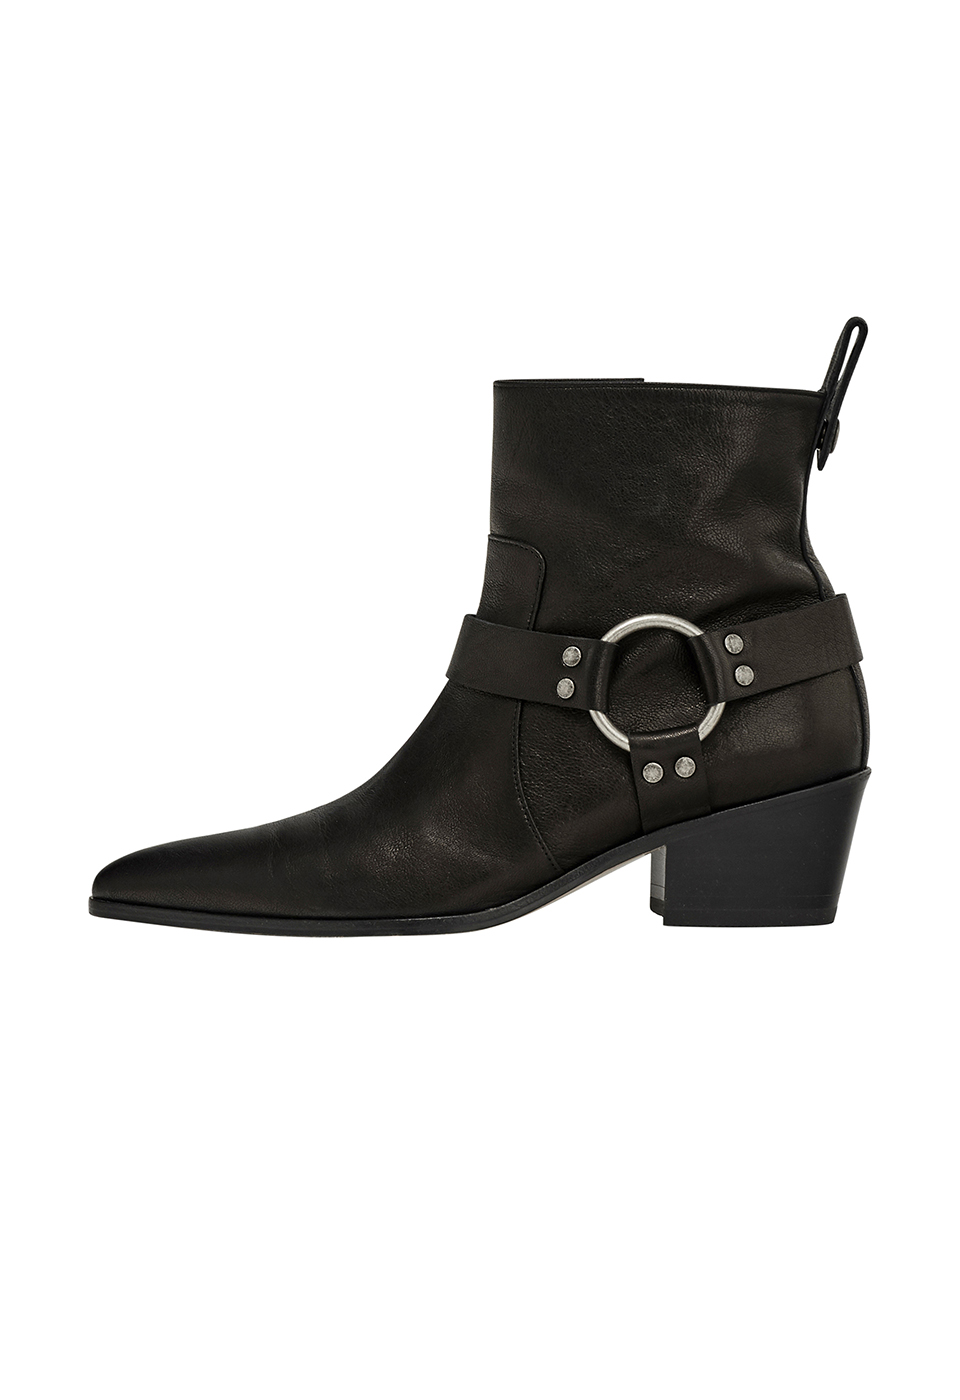 BUCKLE WESTERN BOOTS, BLACK